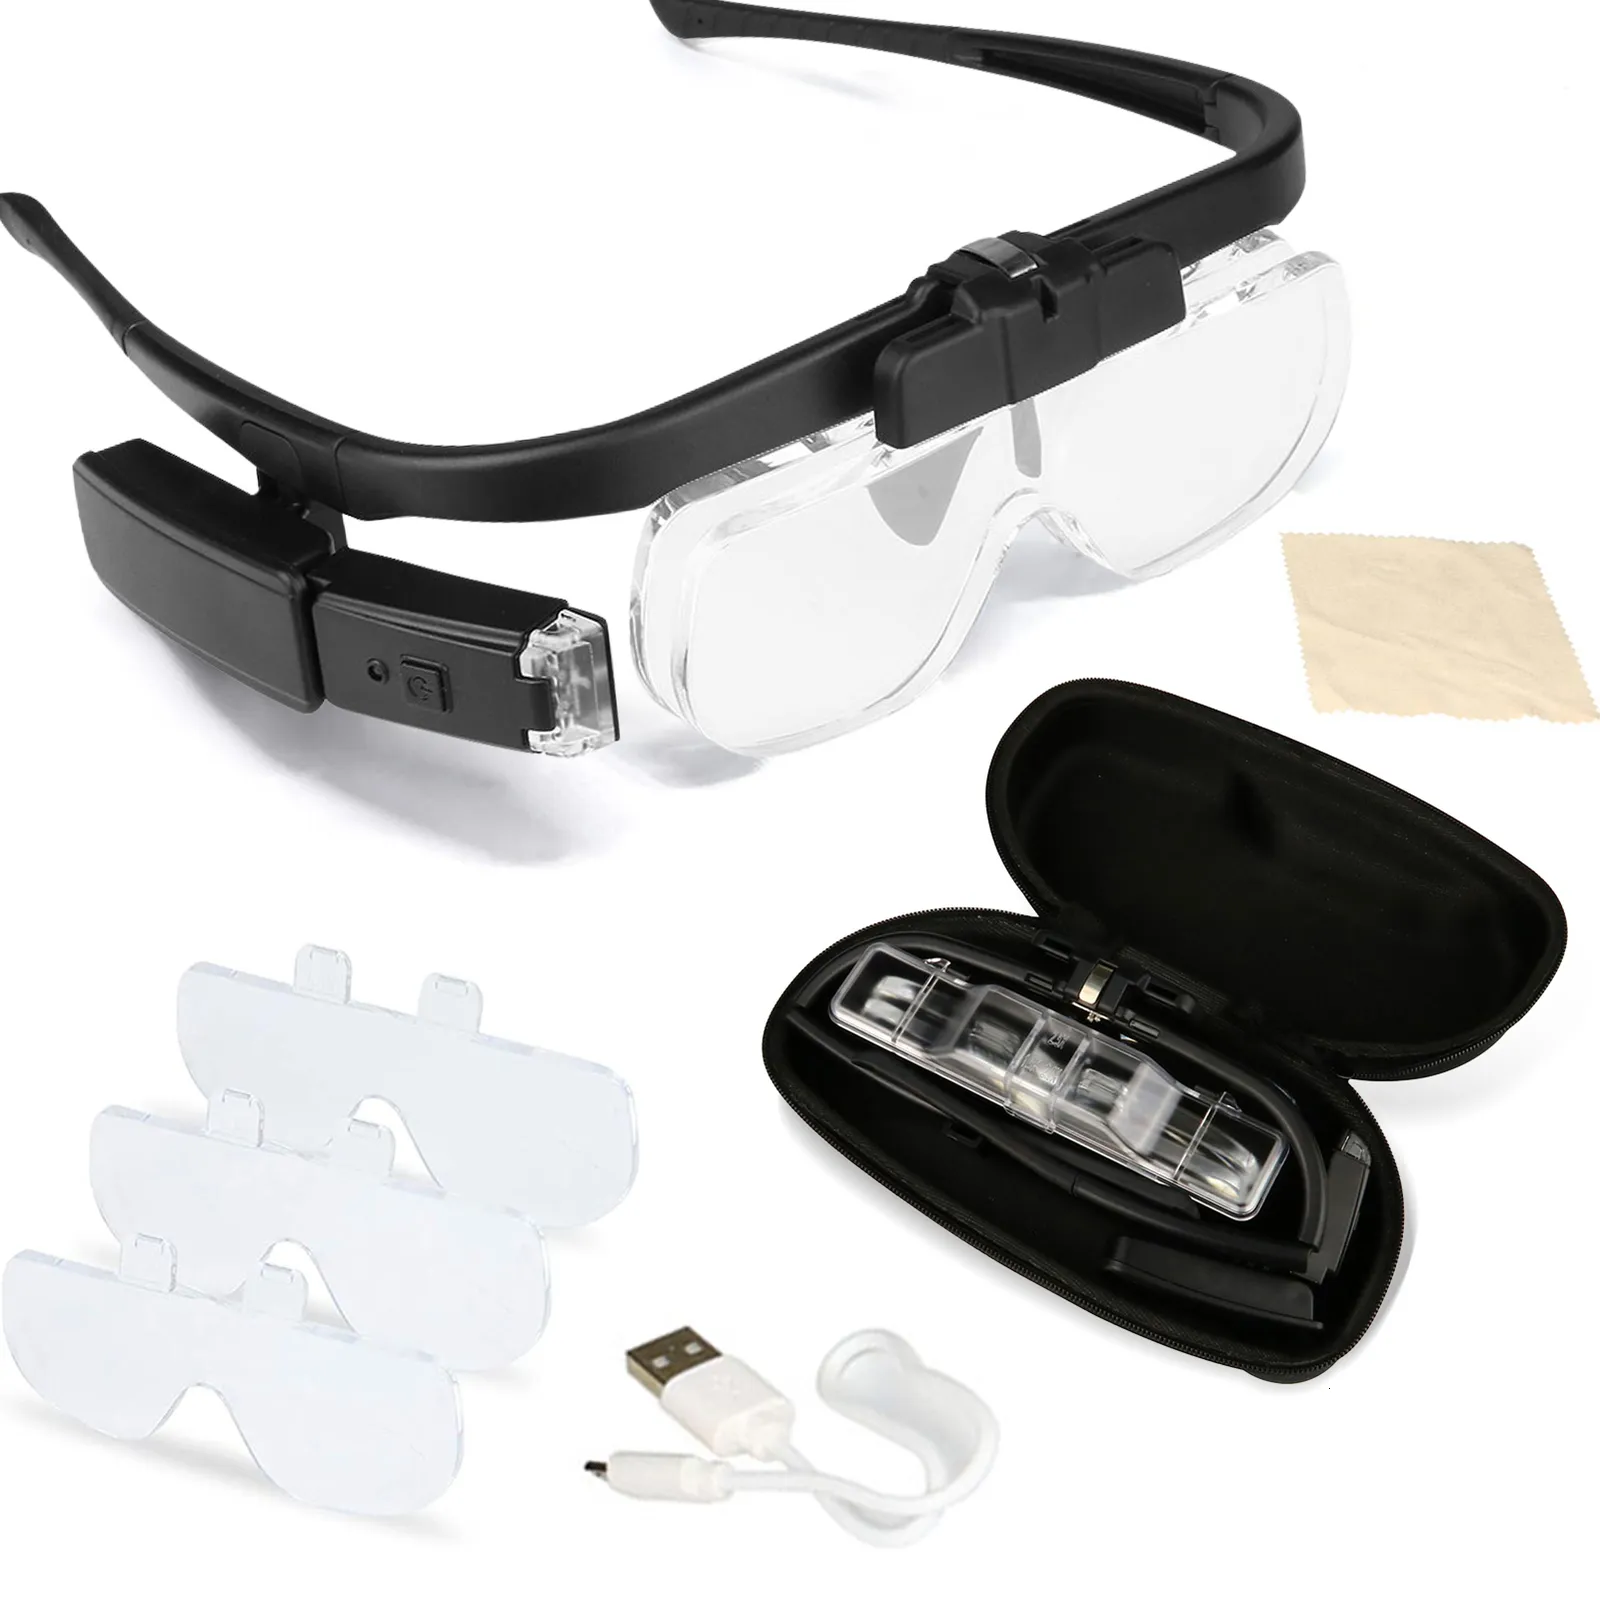 Magnifying Glasses Head Mount Magnifier Glasses With 3 Detachable Lenses 1.5X 2.5X 3.5X 5.0X USB Rechargeable LED Professional Light Repair Tools 230629